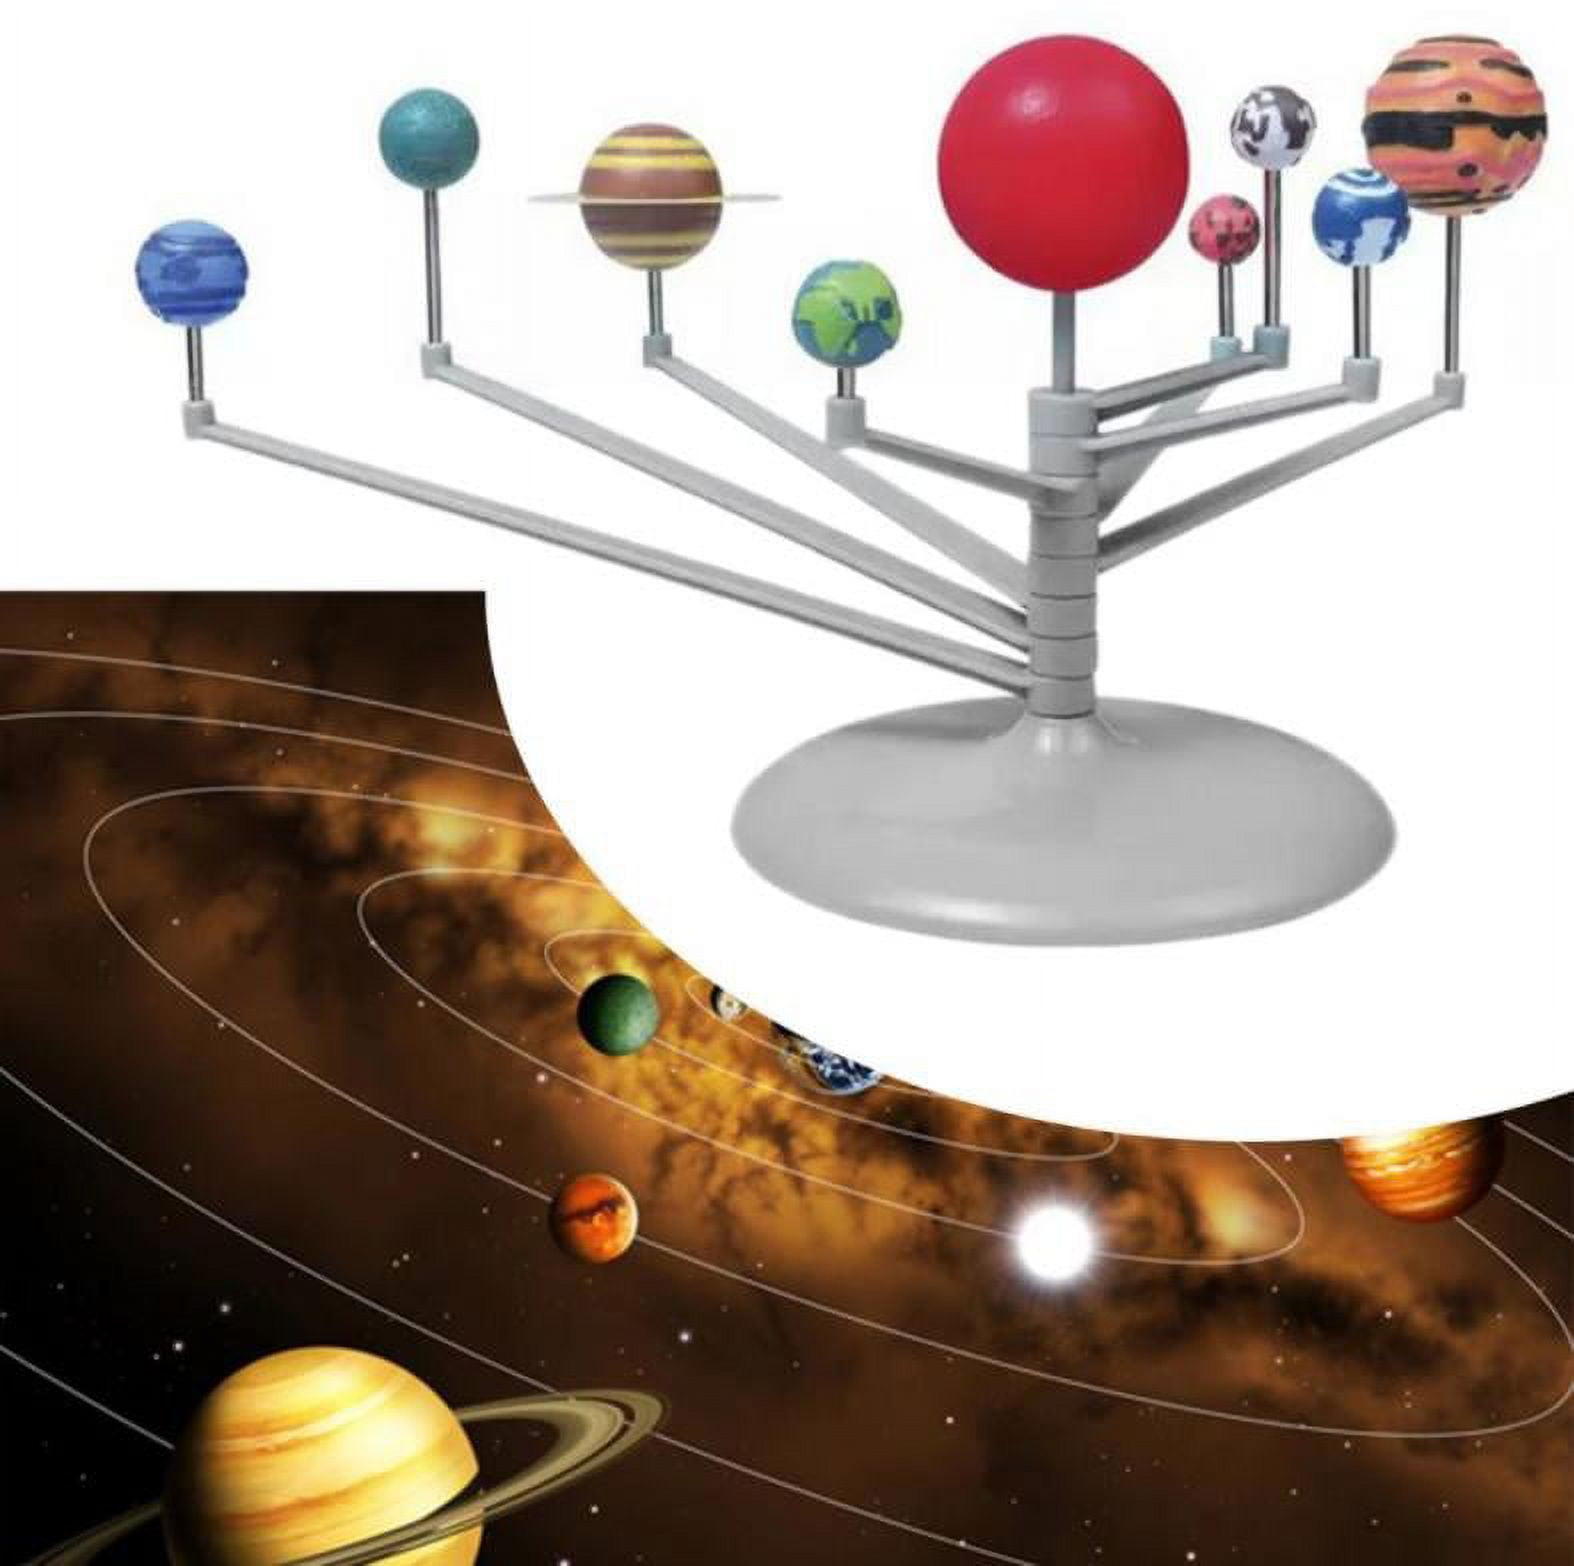 Solar System Mobile Kit - A2Z Science & Learning Toy Store